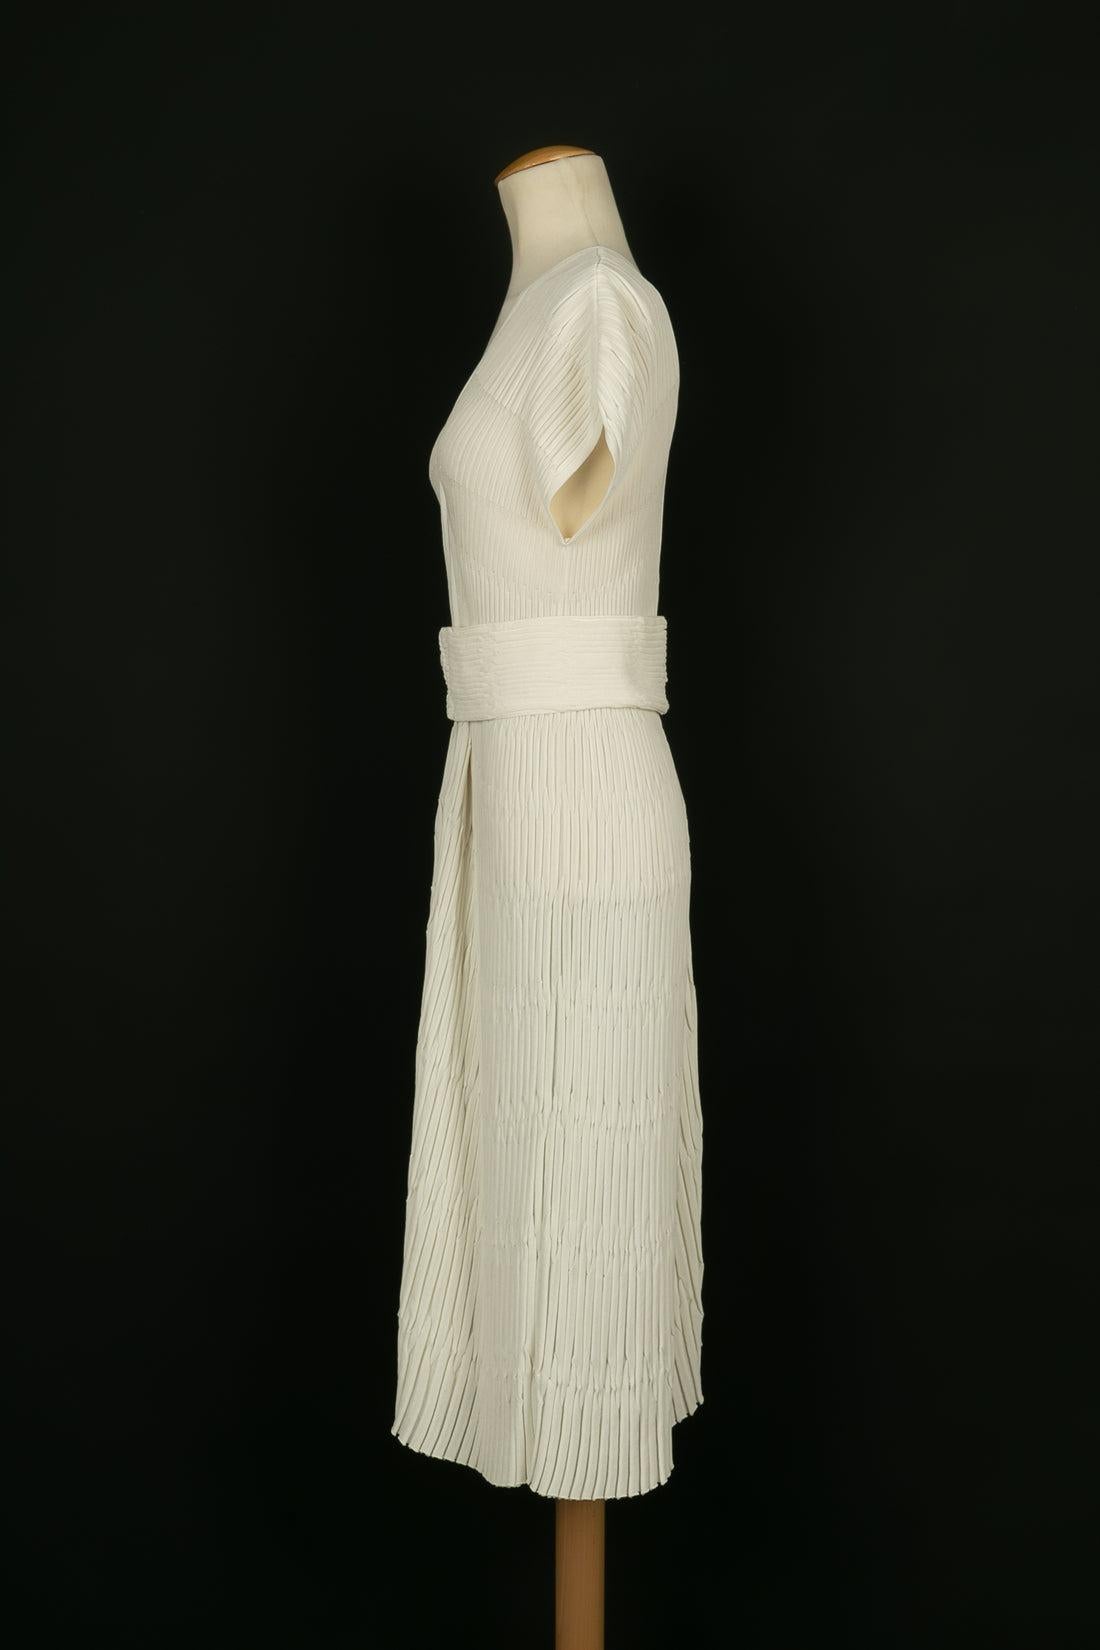 Chanel - (Made in France) Dress in white cotton blend, zip in silver plated metal. Indicated size 40FR.

Additional information:
Condition: Very good condition
Dimensions: Length: 115 cm

Seller Reference: VR91